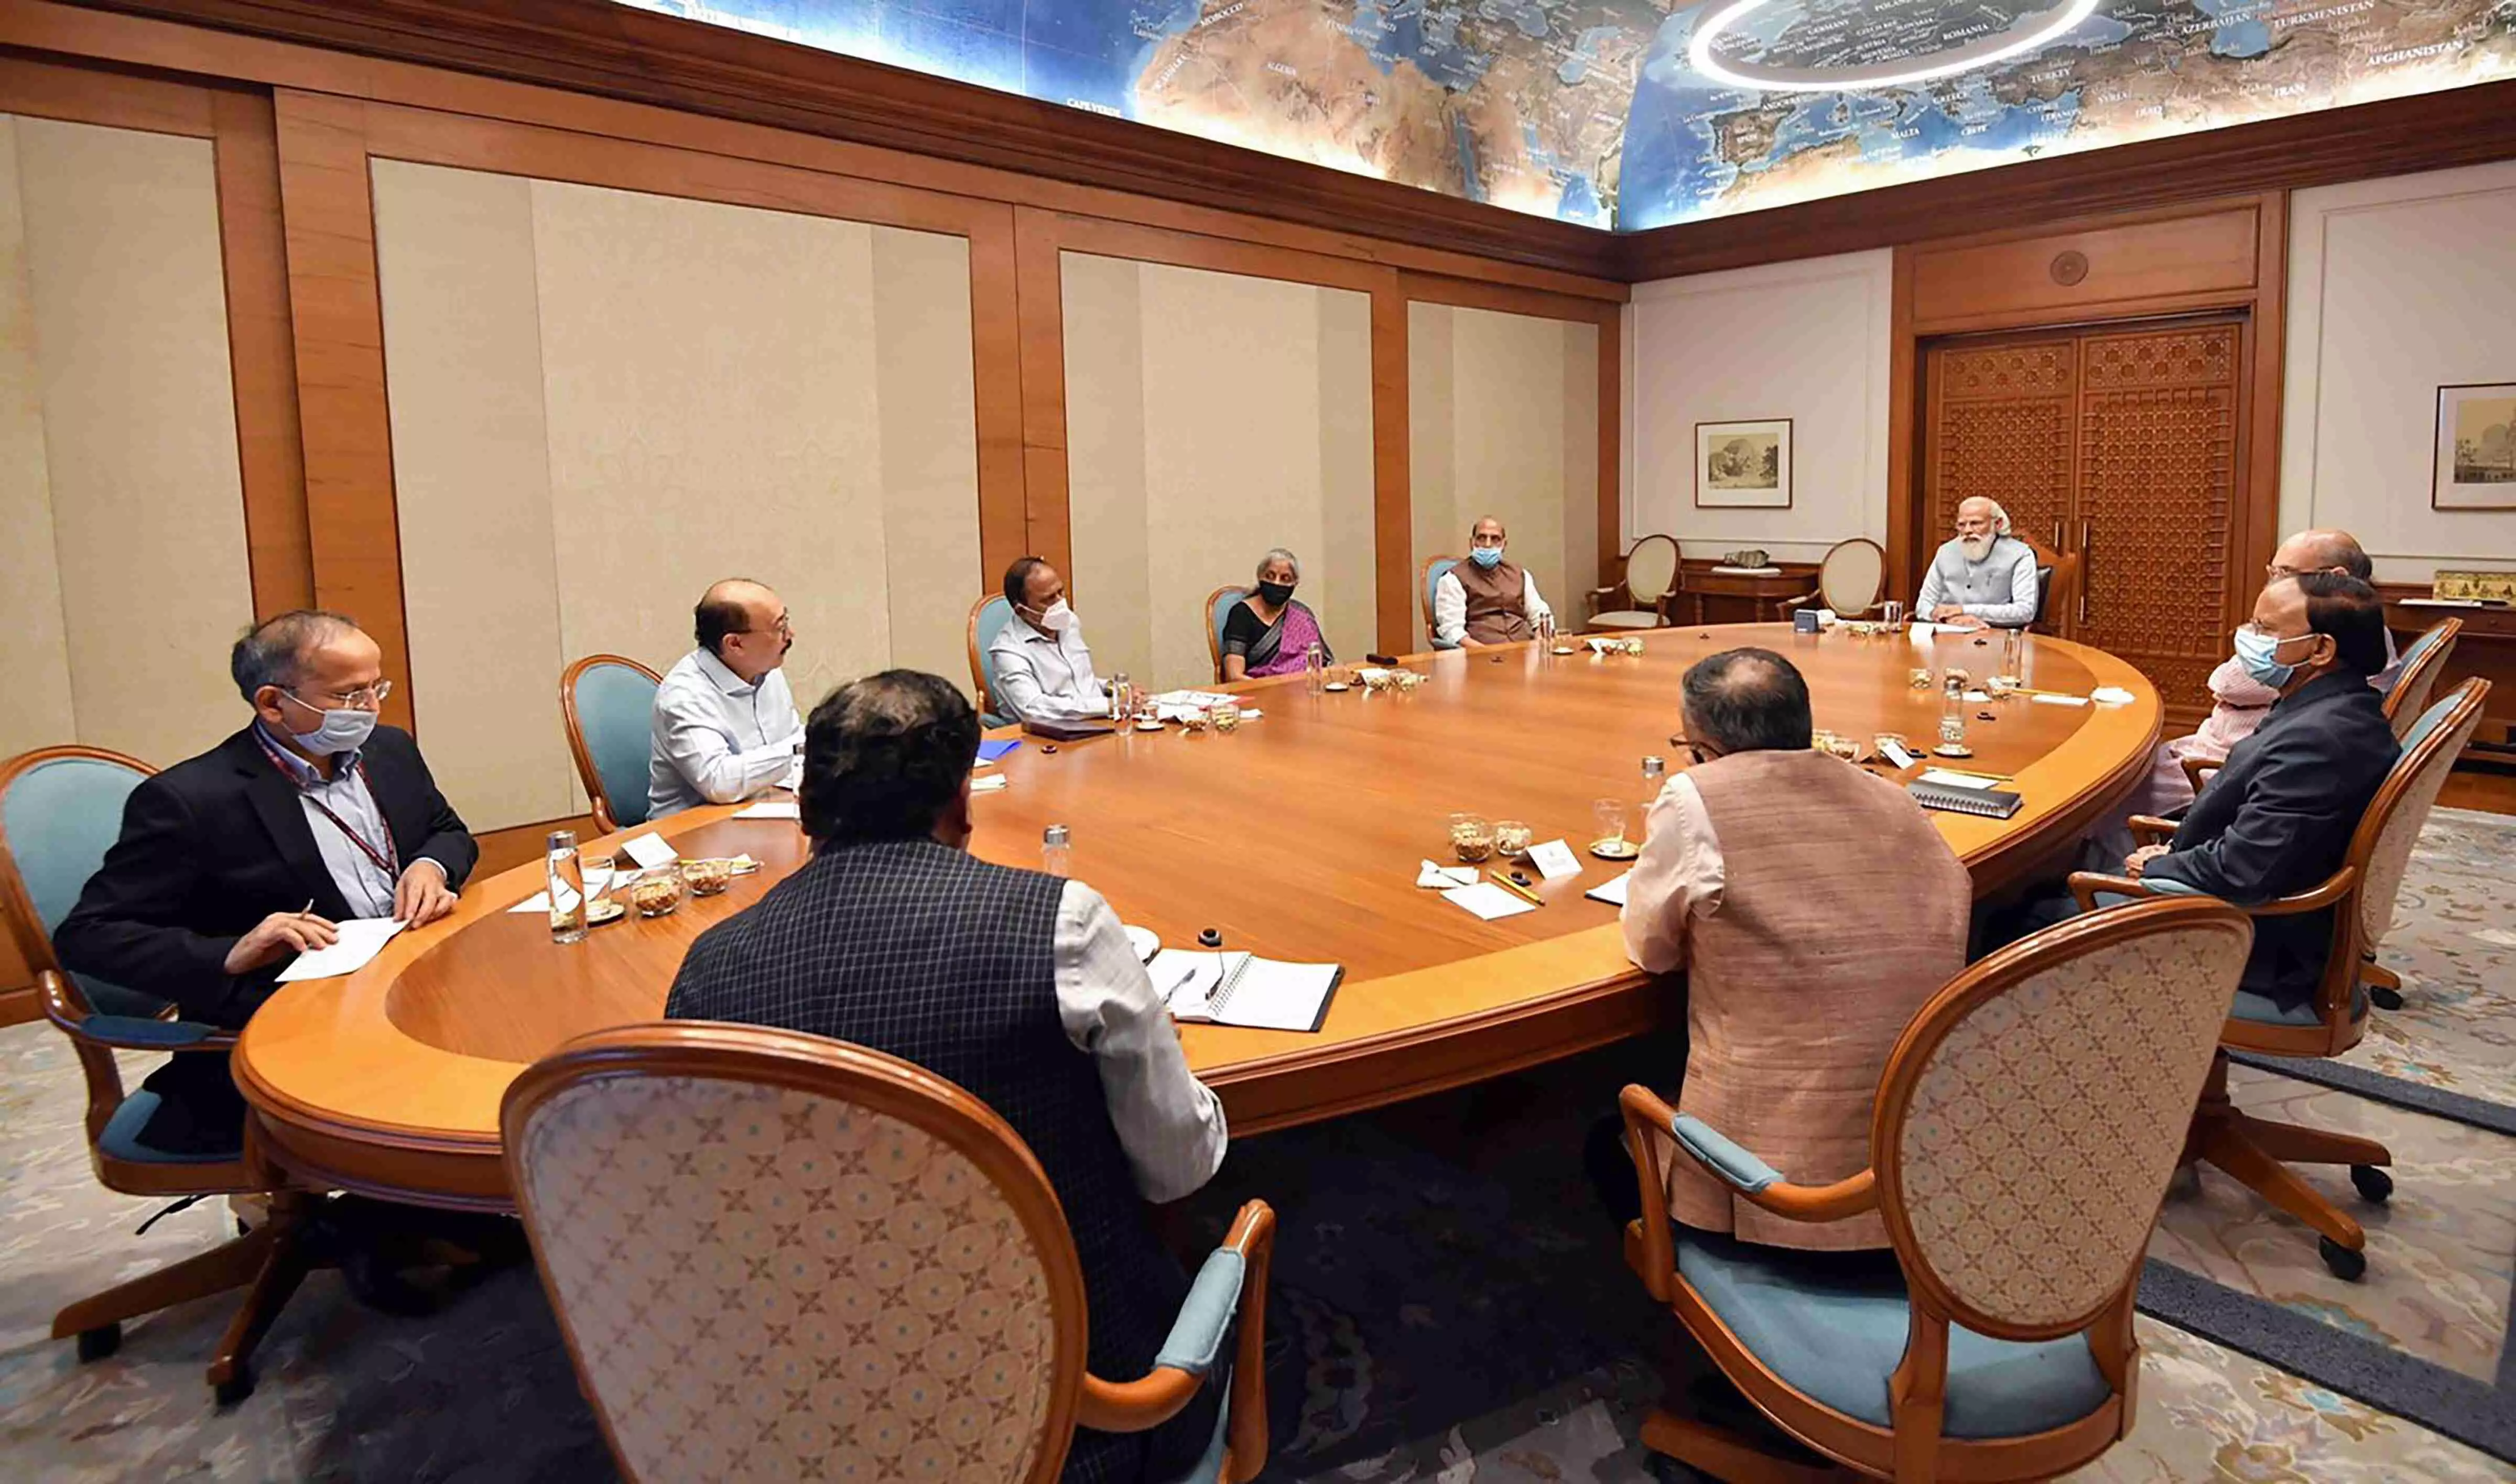 Union Cabinet approves bill to replace Delhi services ordinance: Sources